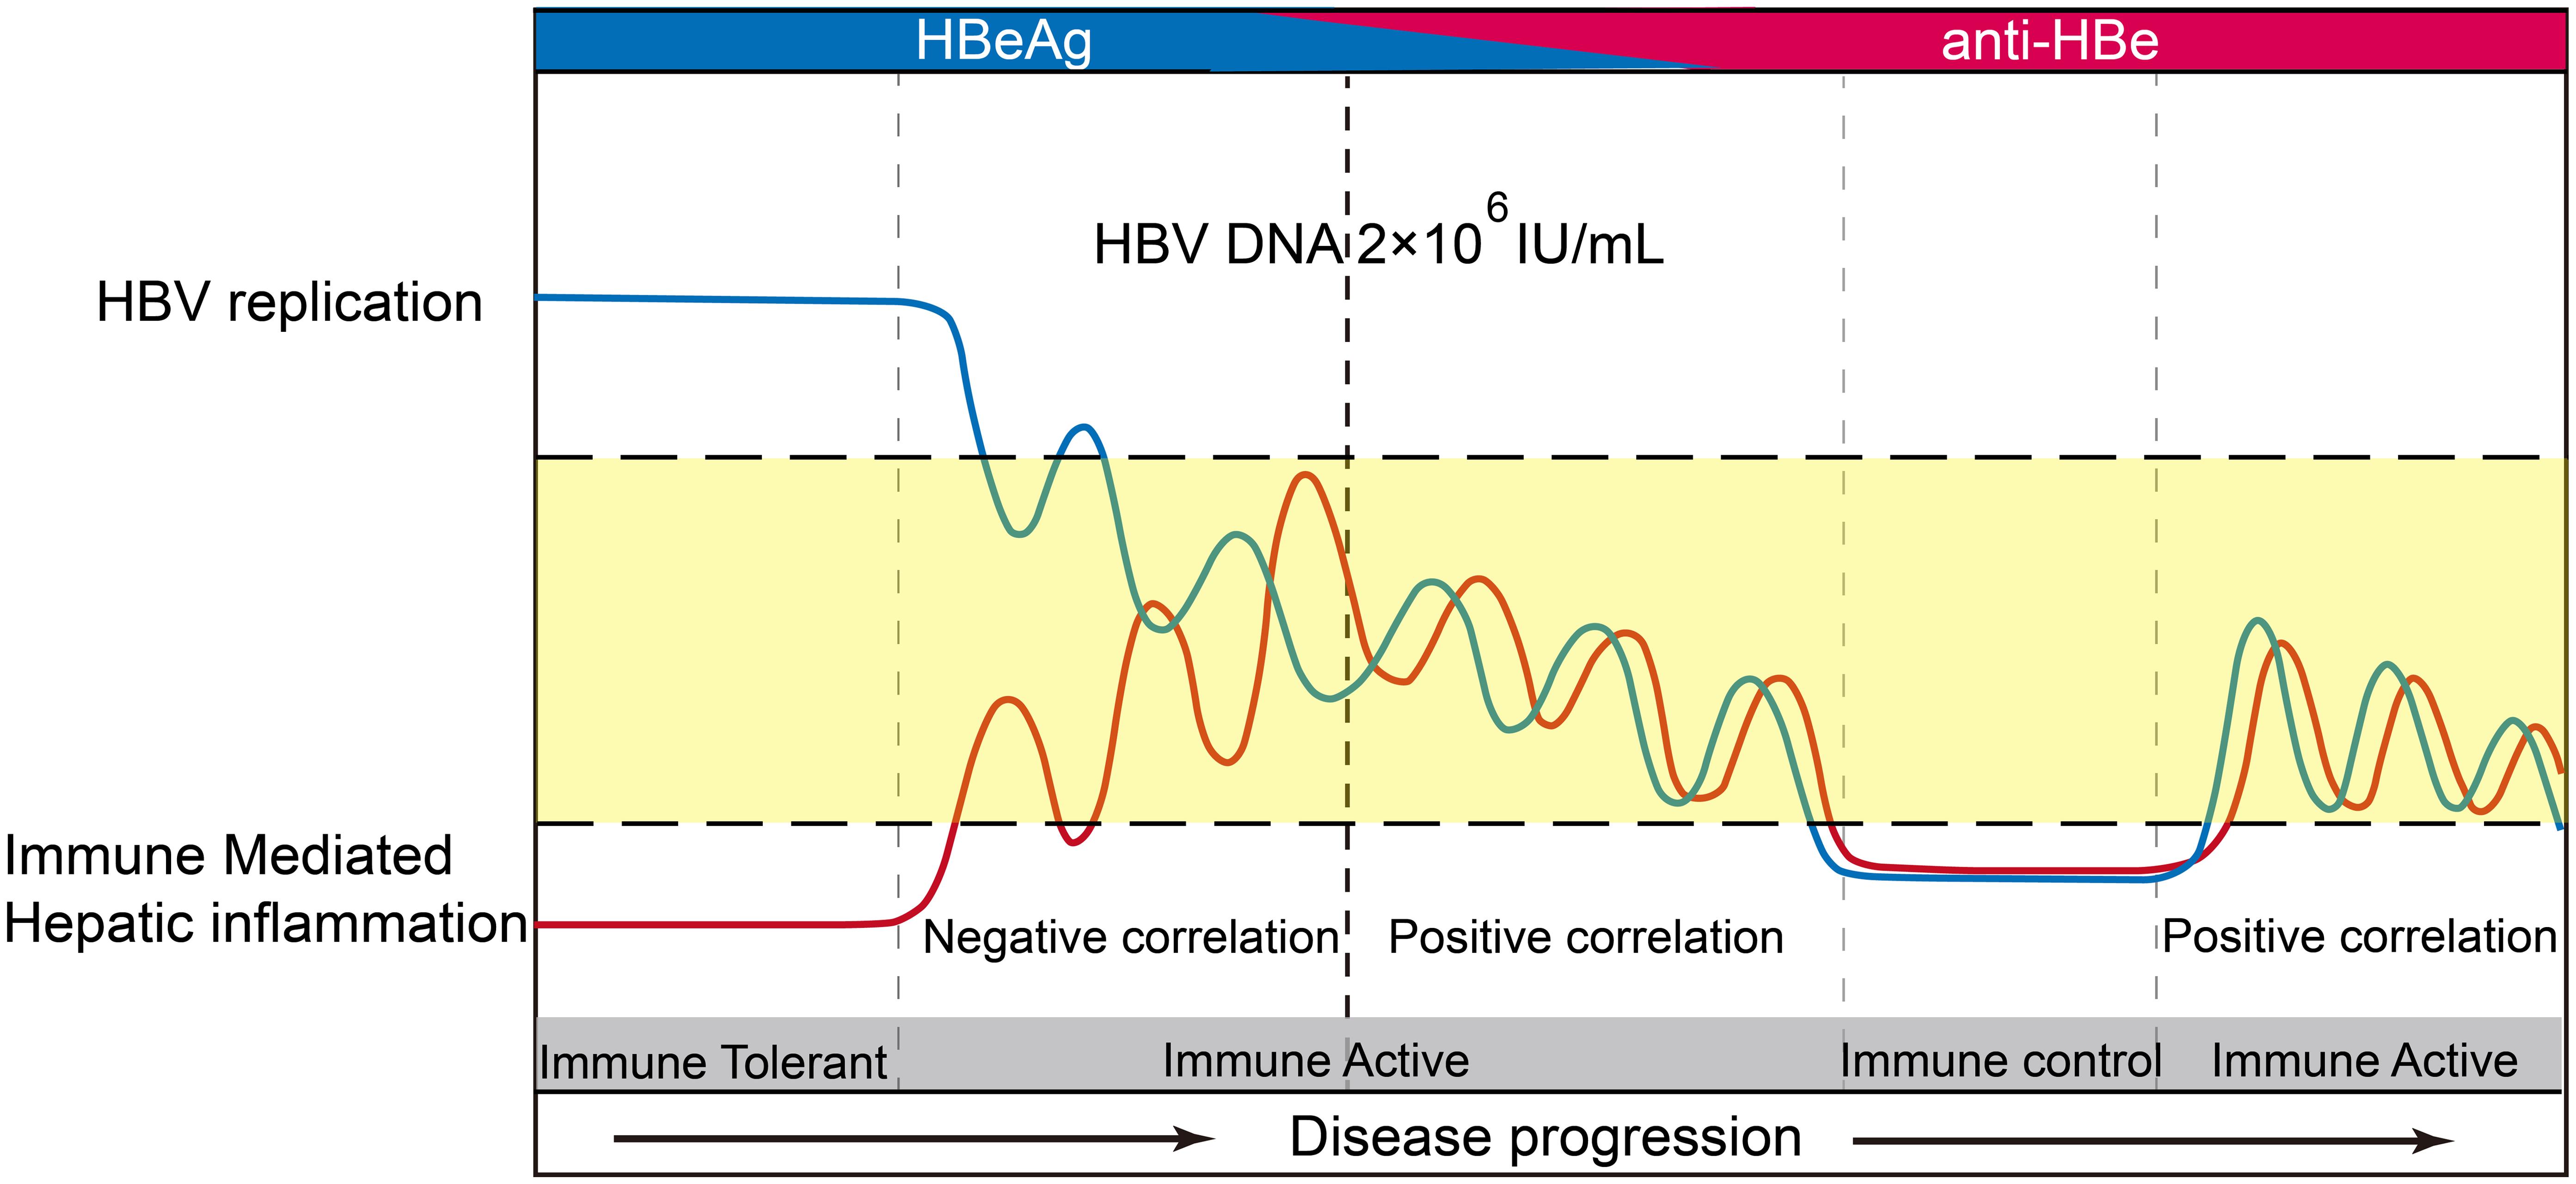 Schematic diagram of the relationship between viral replication and the severity of hepatic necroinflammation of CHB in disease progression.